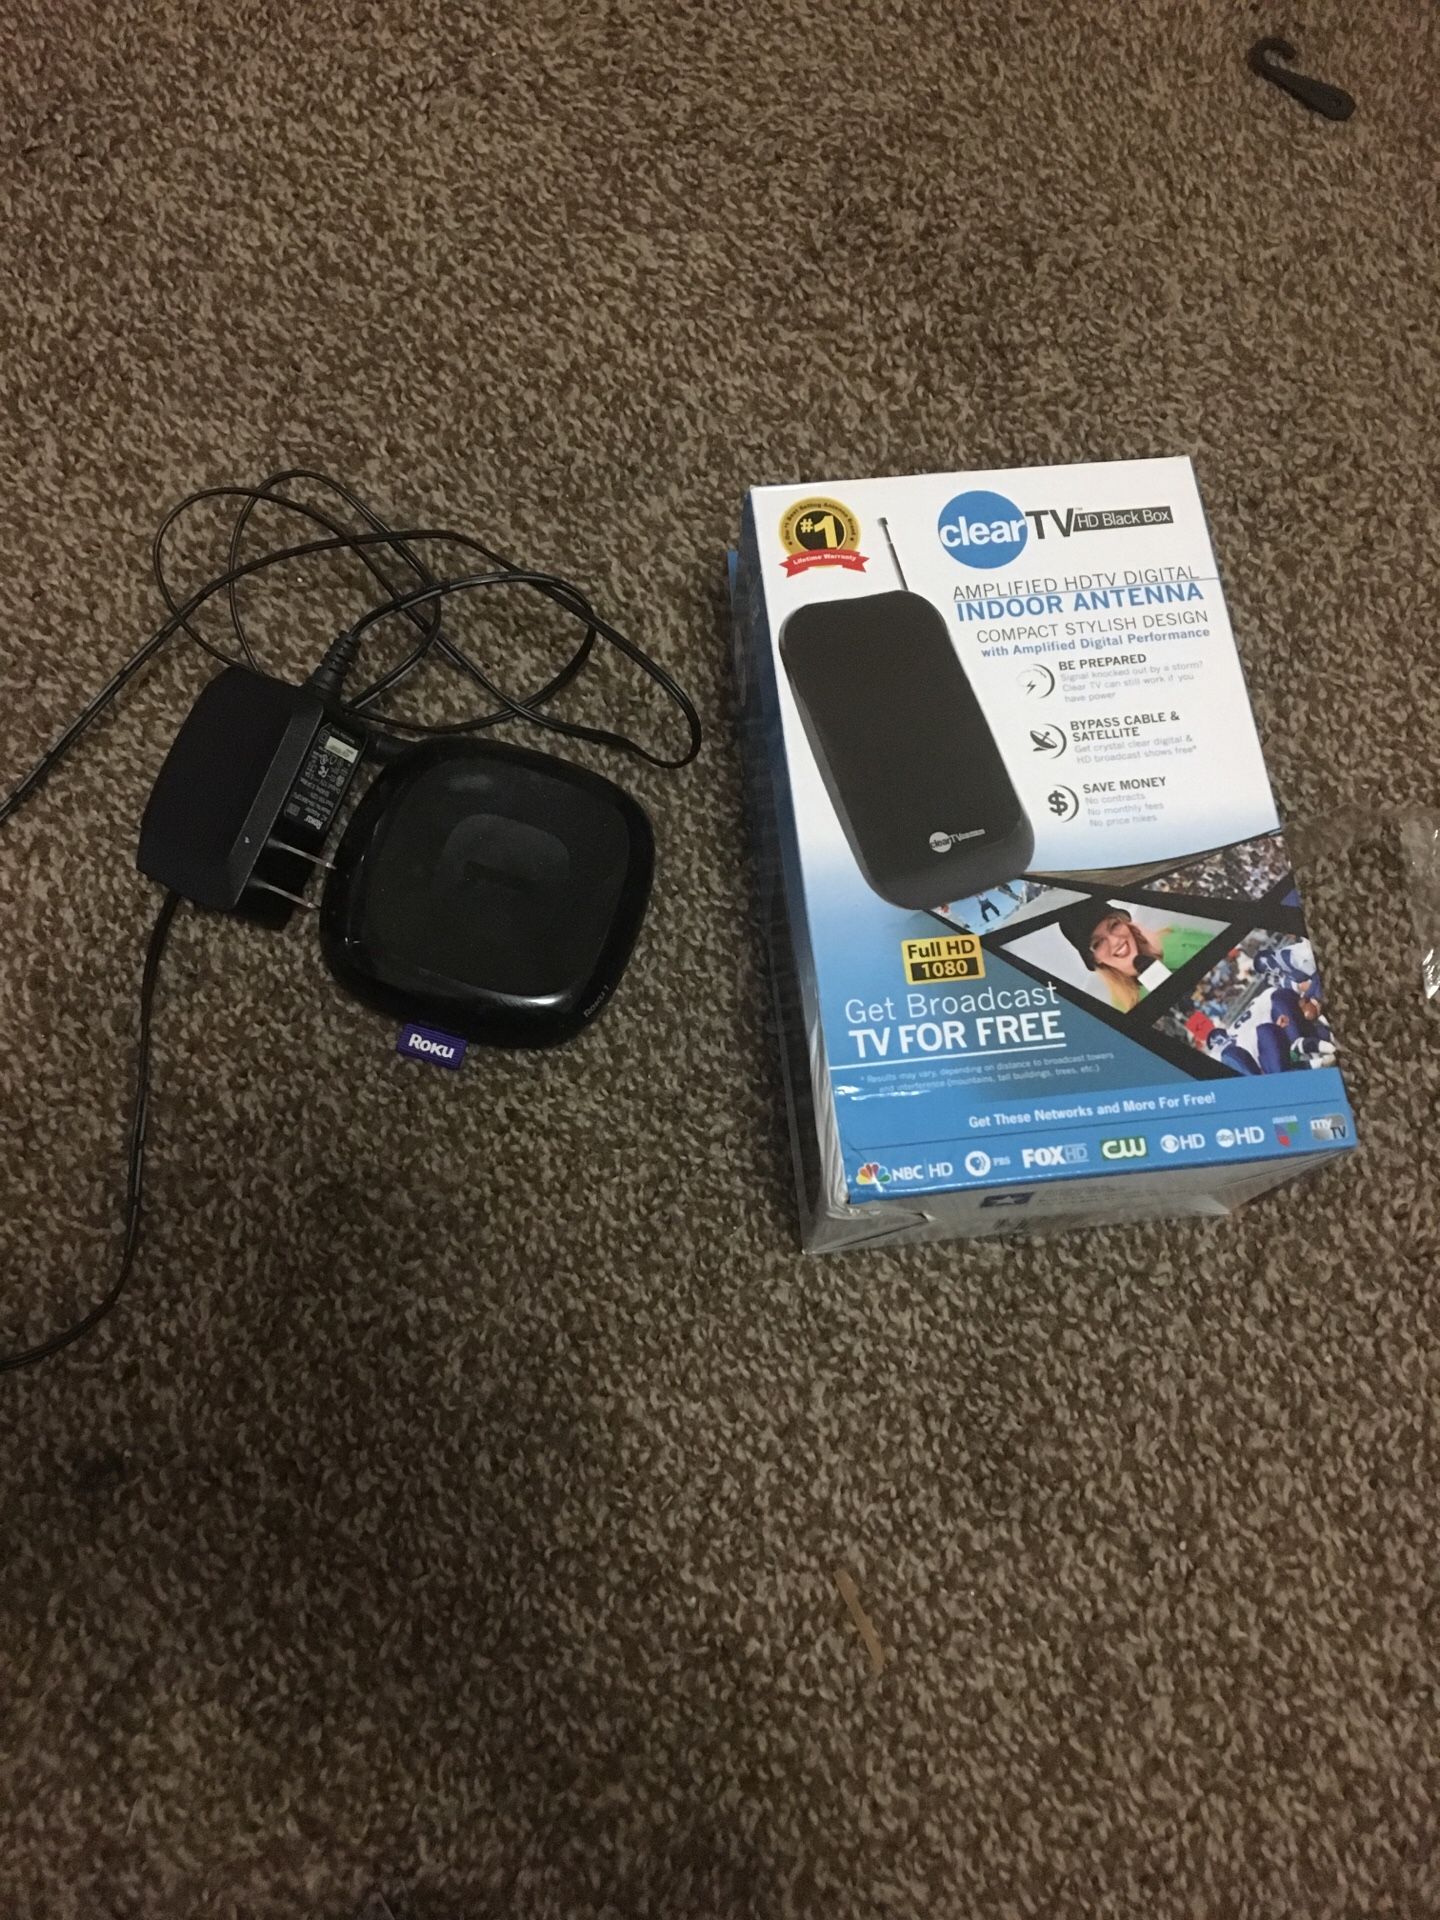 I have a Roku and a amplified HDTV DIGITAL INDOOR ANTENNA